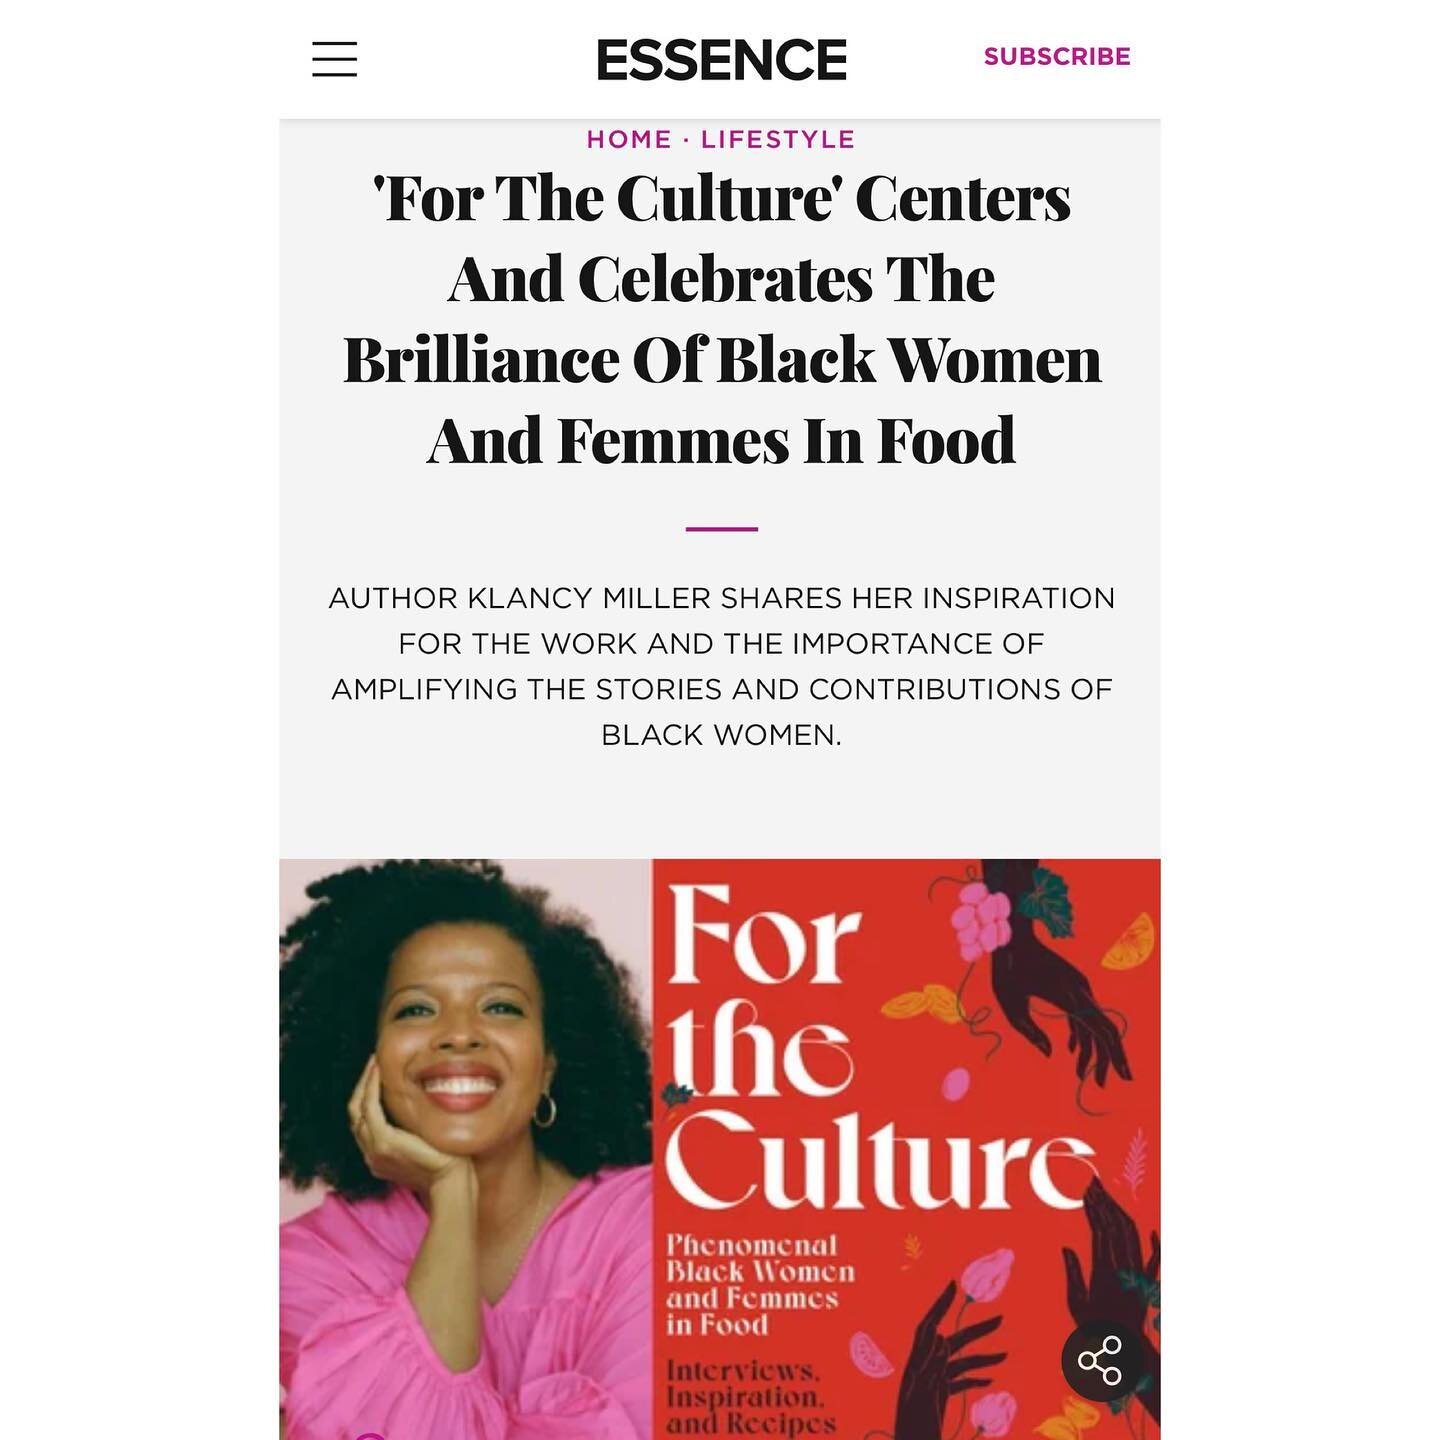 It&rsquo;s day four of For the Culture being out and here&rsquo;s some exciting press. Thank you to the wonderful journalists who interviewed me about the book! Everyone please go buy it, learn from the phenomenal women and femmes in For the Culture 